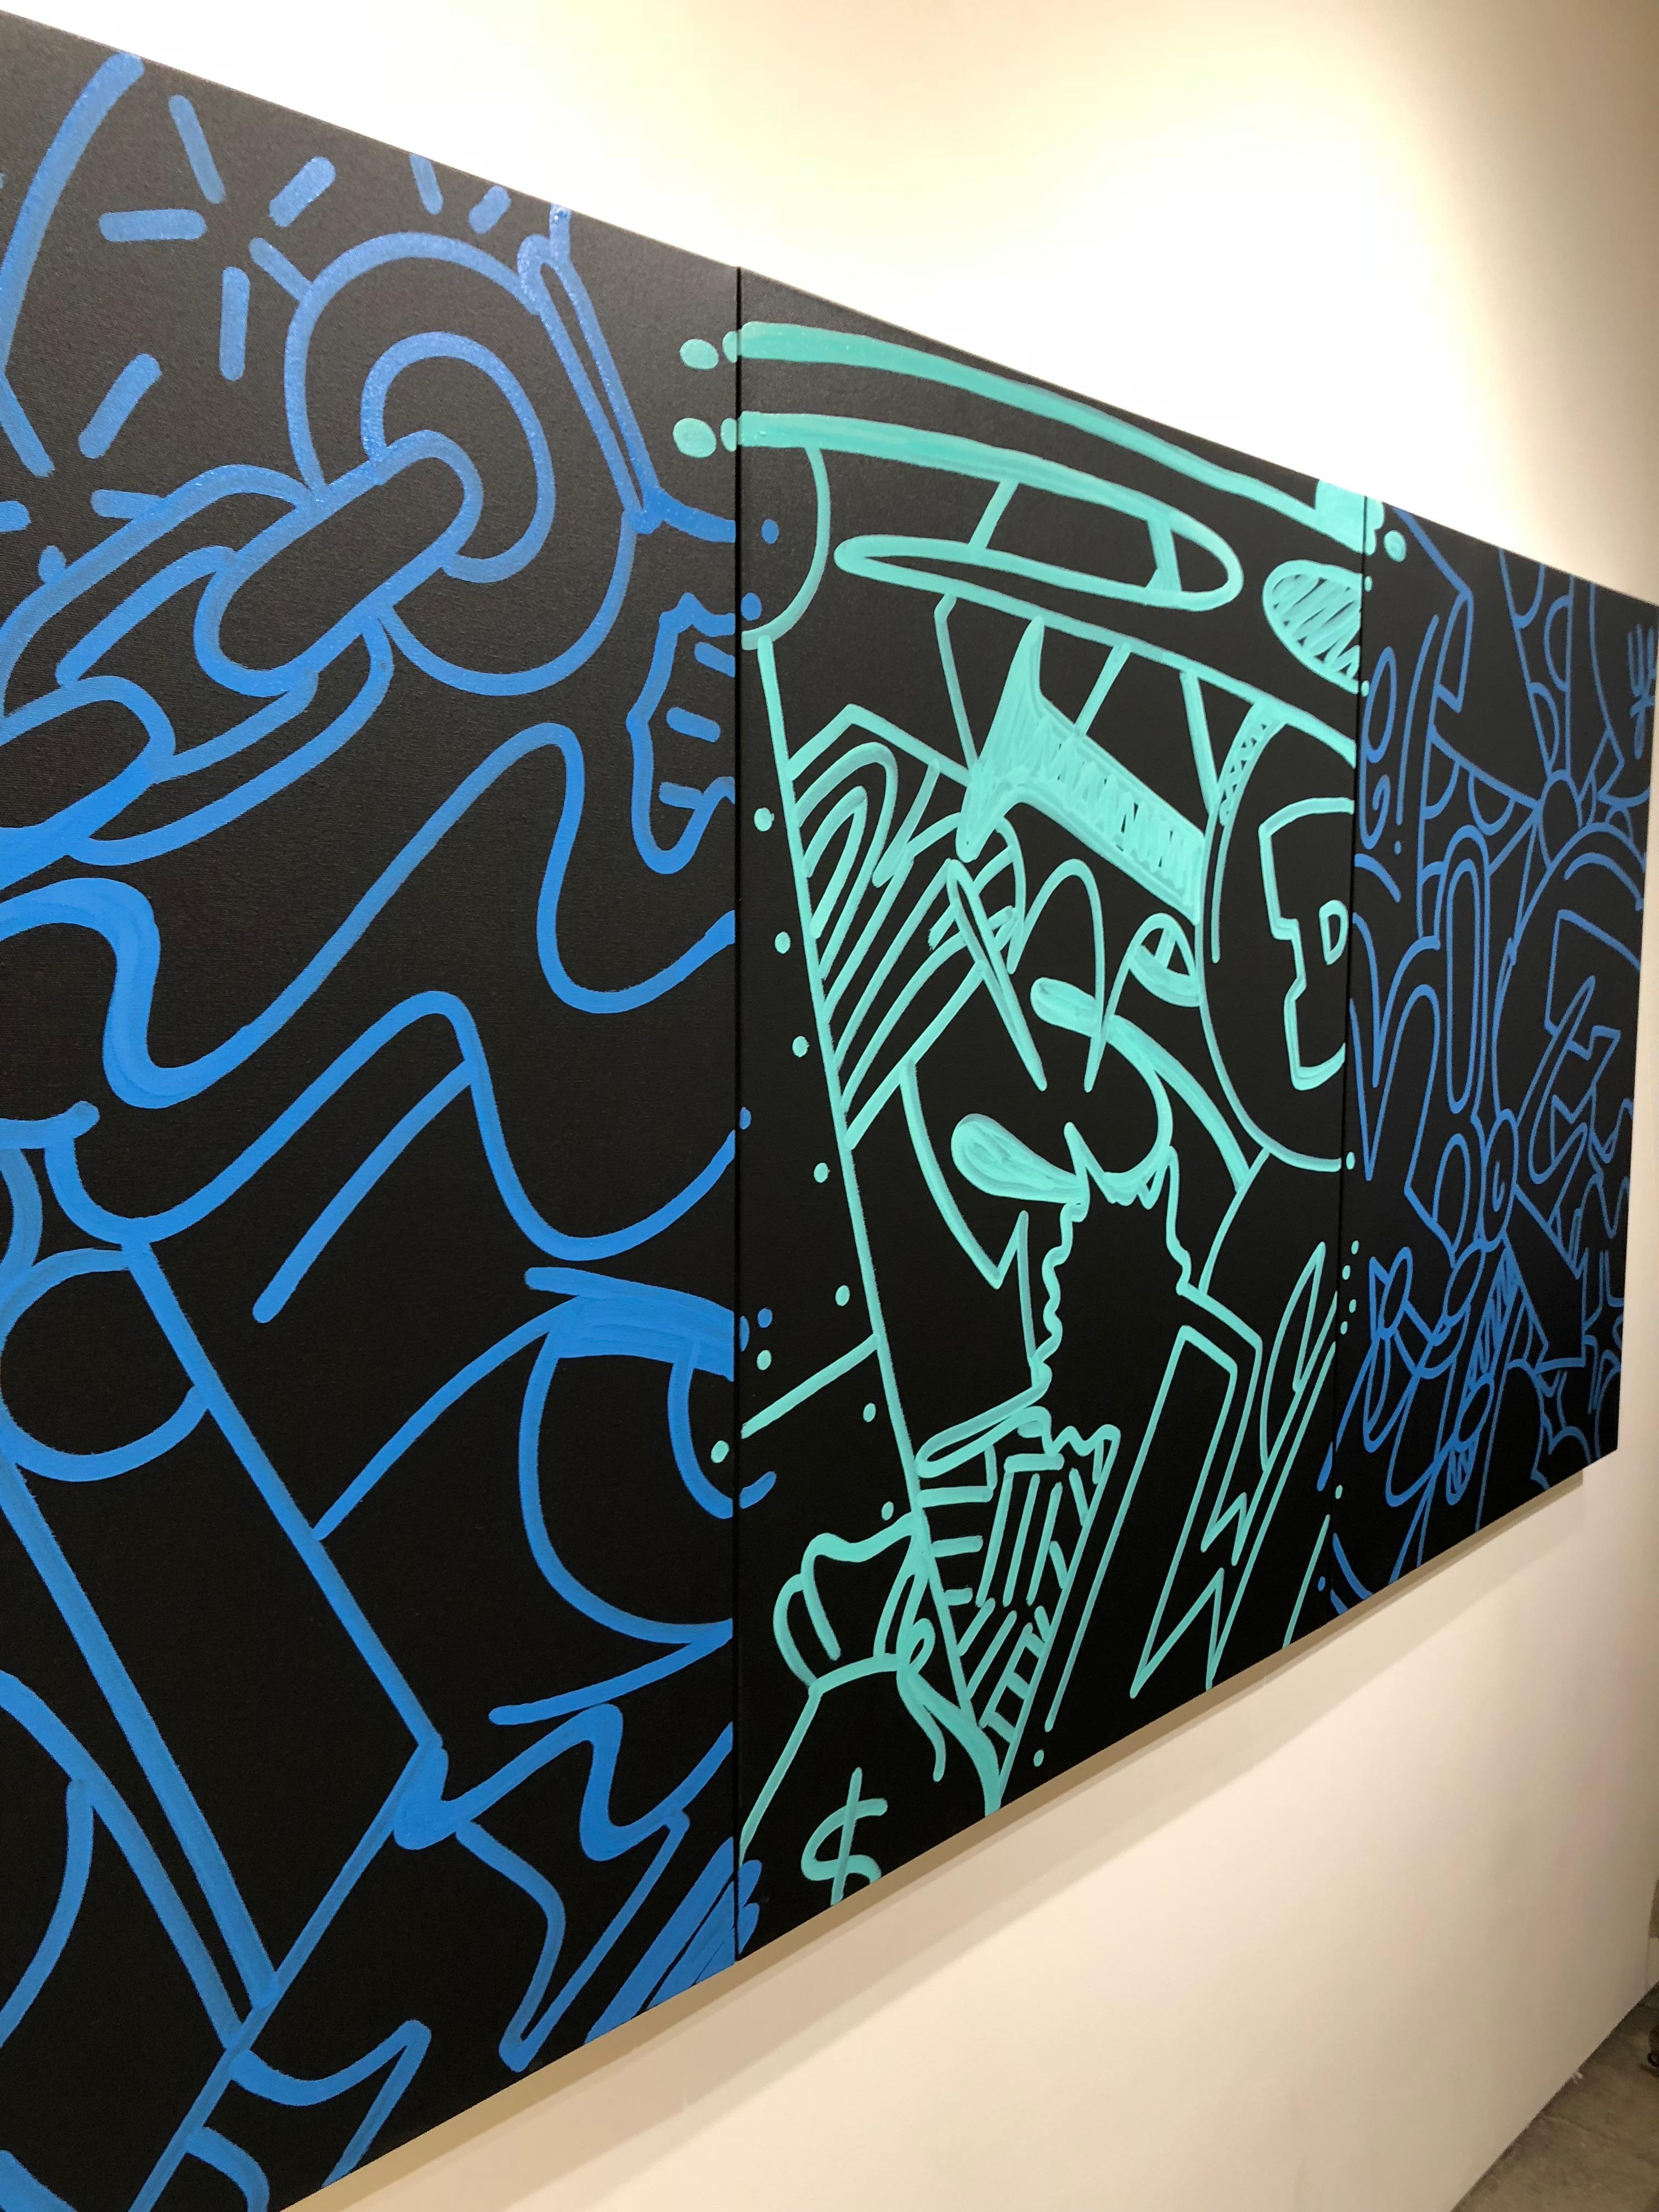 John CRASH Matos
3 Degrees of Separation (Triptych-3 pieces)
Spray Paint and Enamel on Canvas
40 inches x 90 inches total size

Graffiti Art, Street Art, Urban Art

Born John Matos in 1961, CRASH was raised in the Bronx, New York.  At the age of 13,